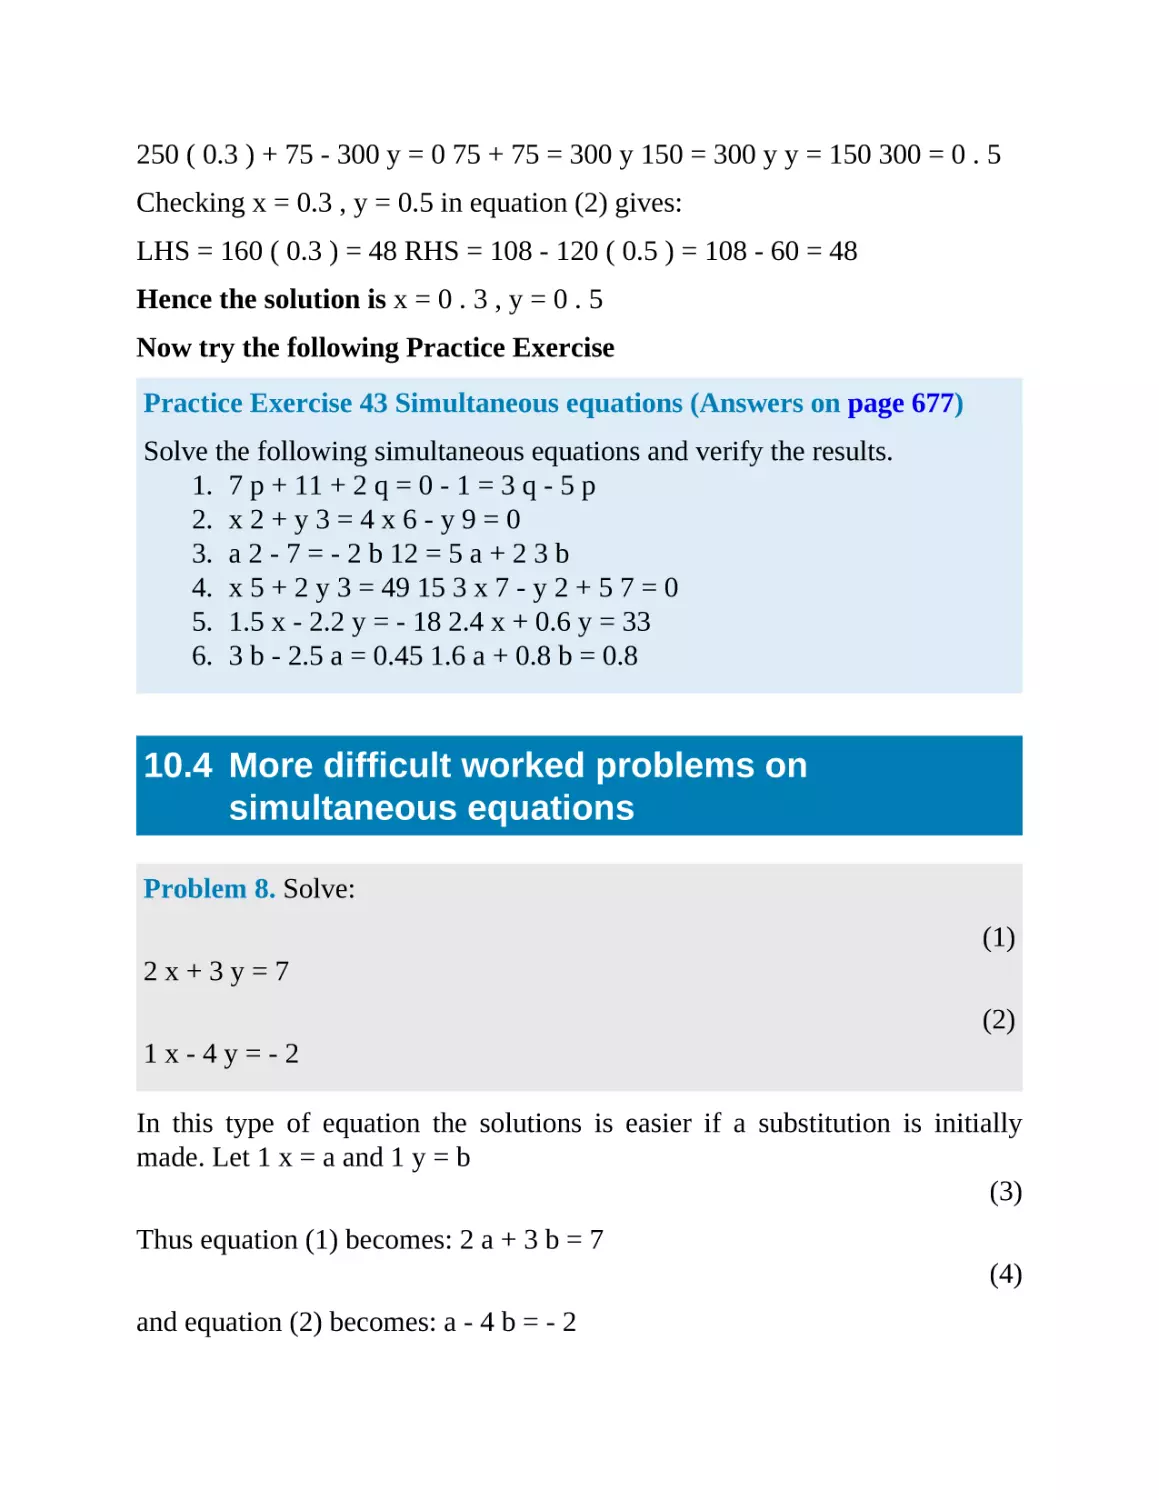 10.4 More difficult worked problems on simultaneous equations